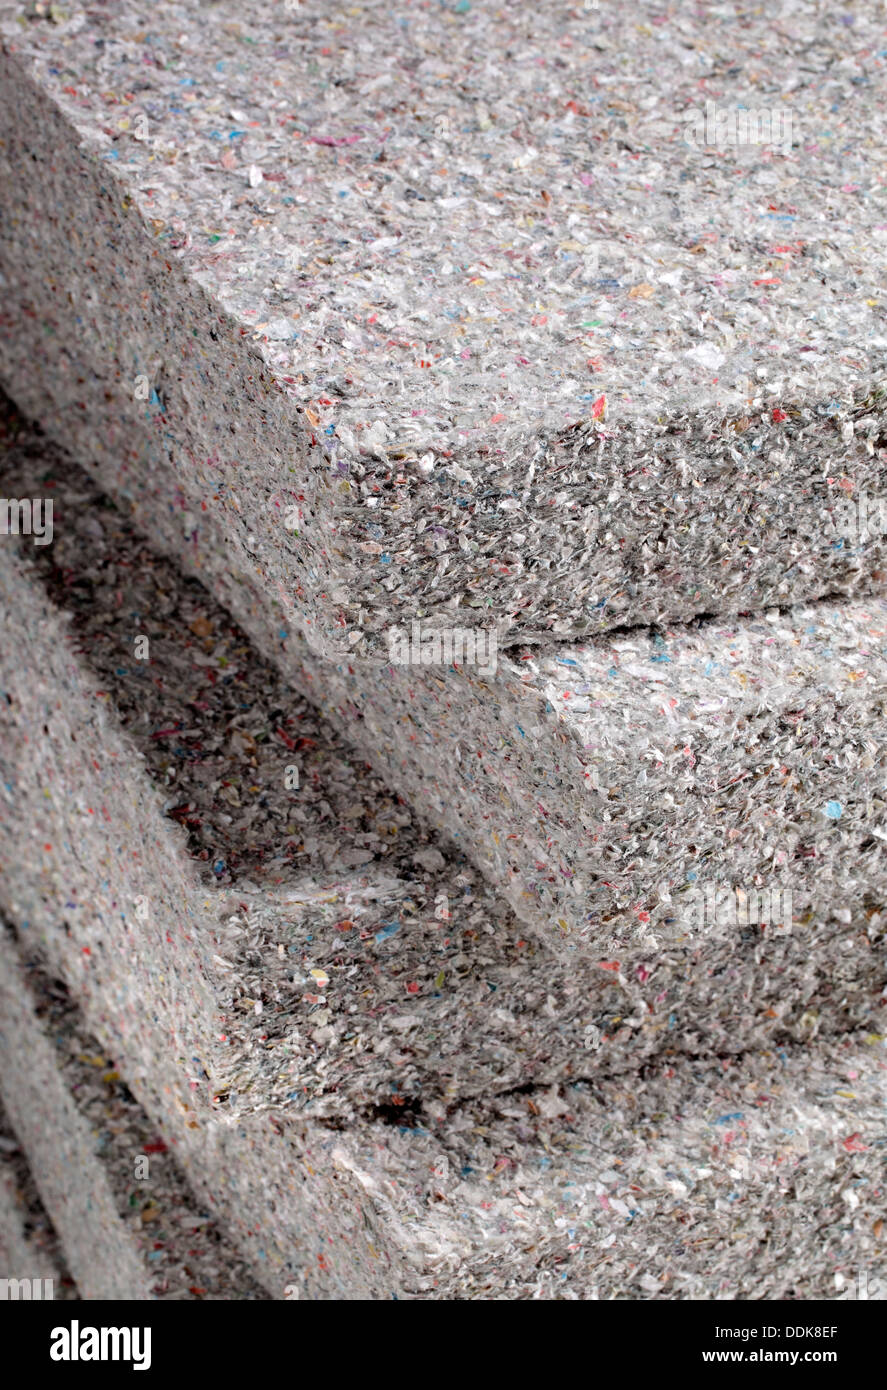 Stack of cellulose insulation batt panels, made of recycled newspapers, used as building thermal insulation. Stock Photo